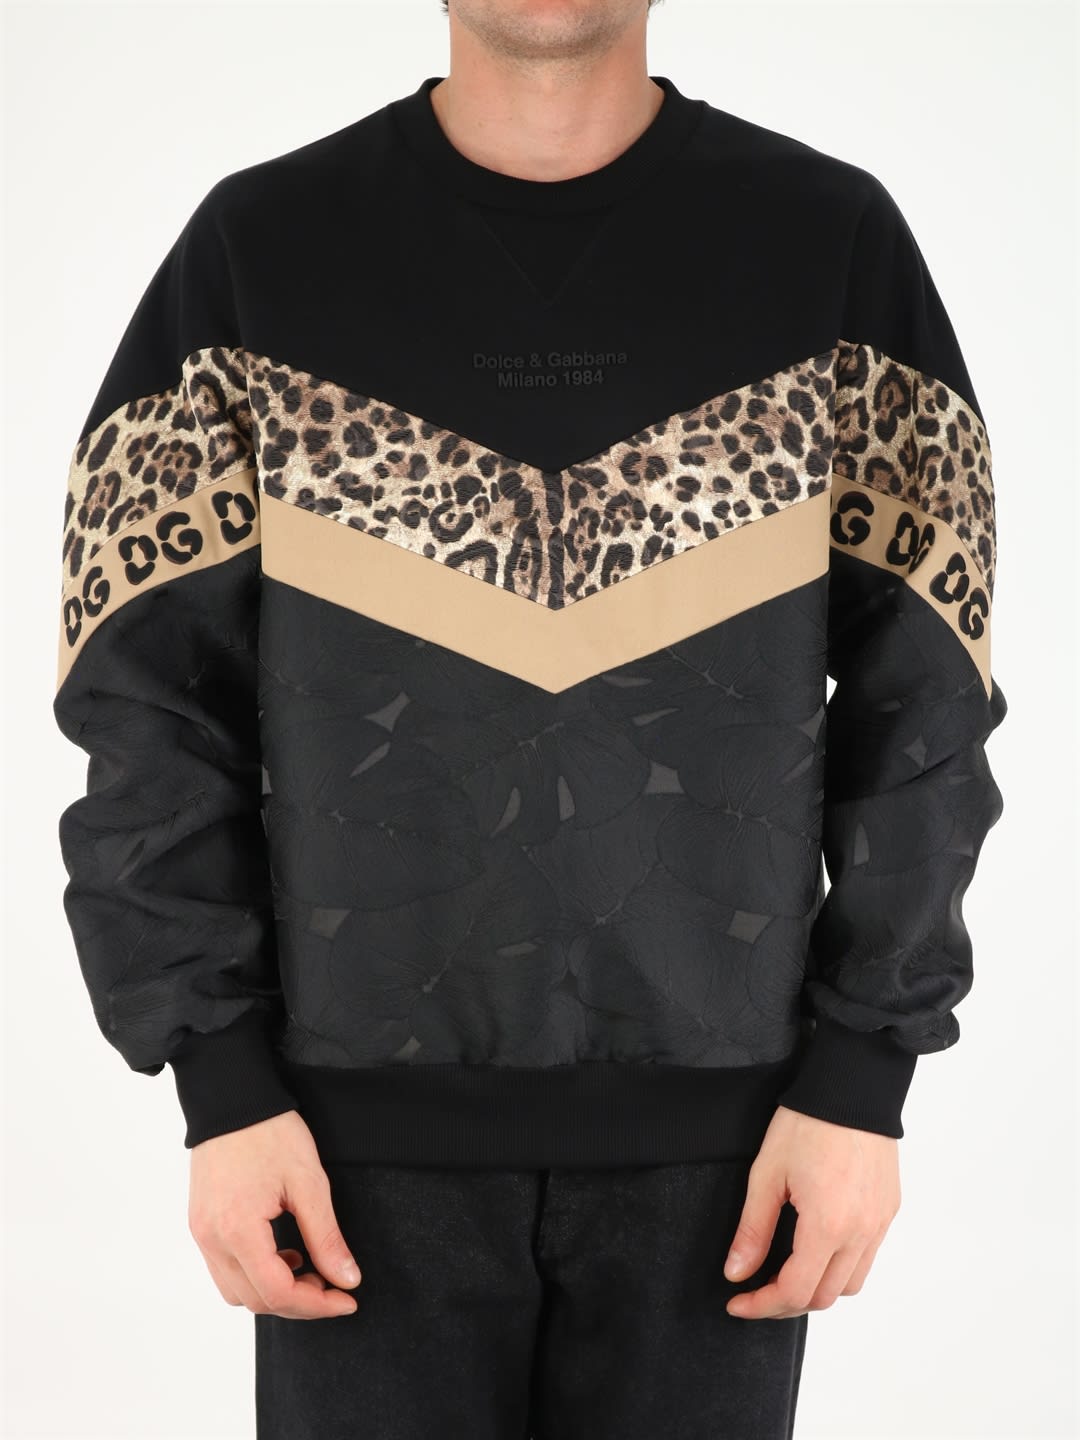 Dolce & Gabbana Mixed Fabric Sweatshirt With Leopard Intarsia With Patch